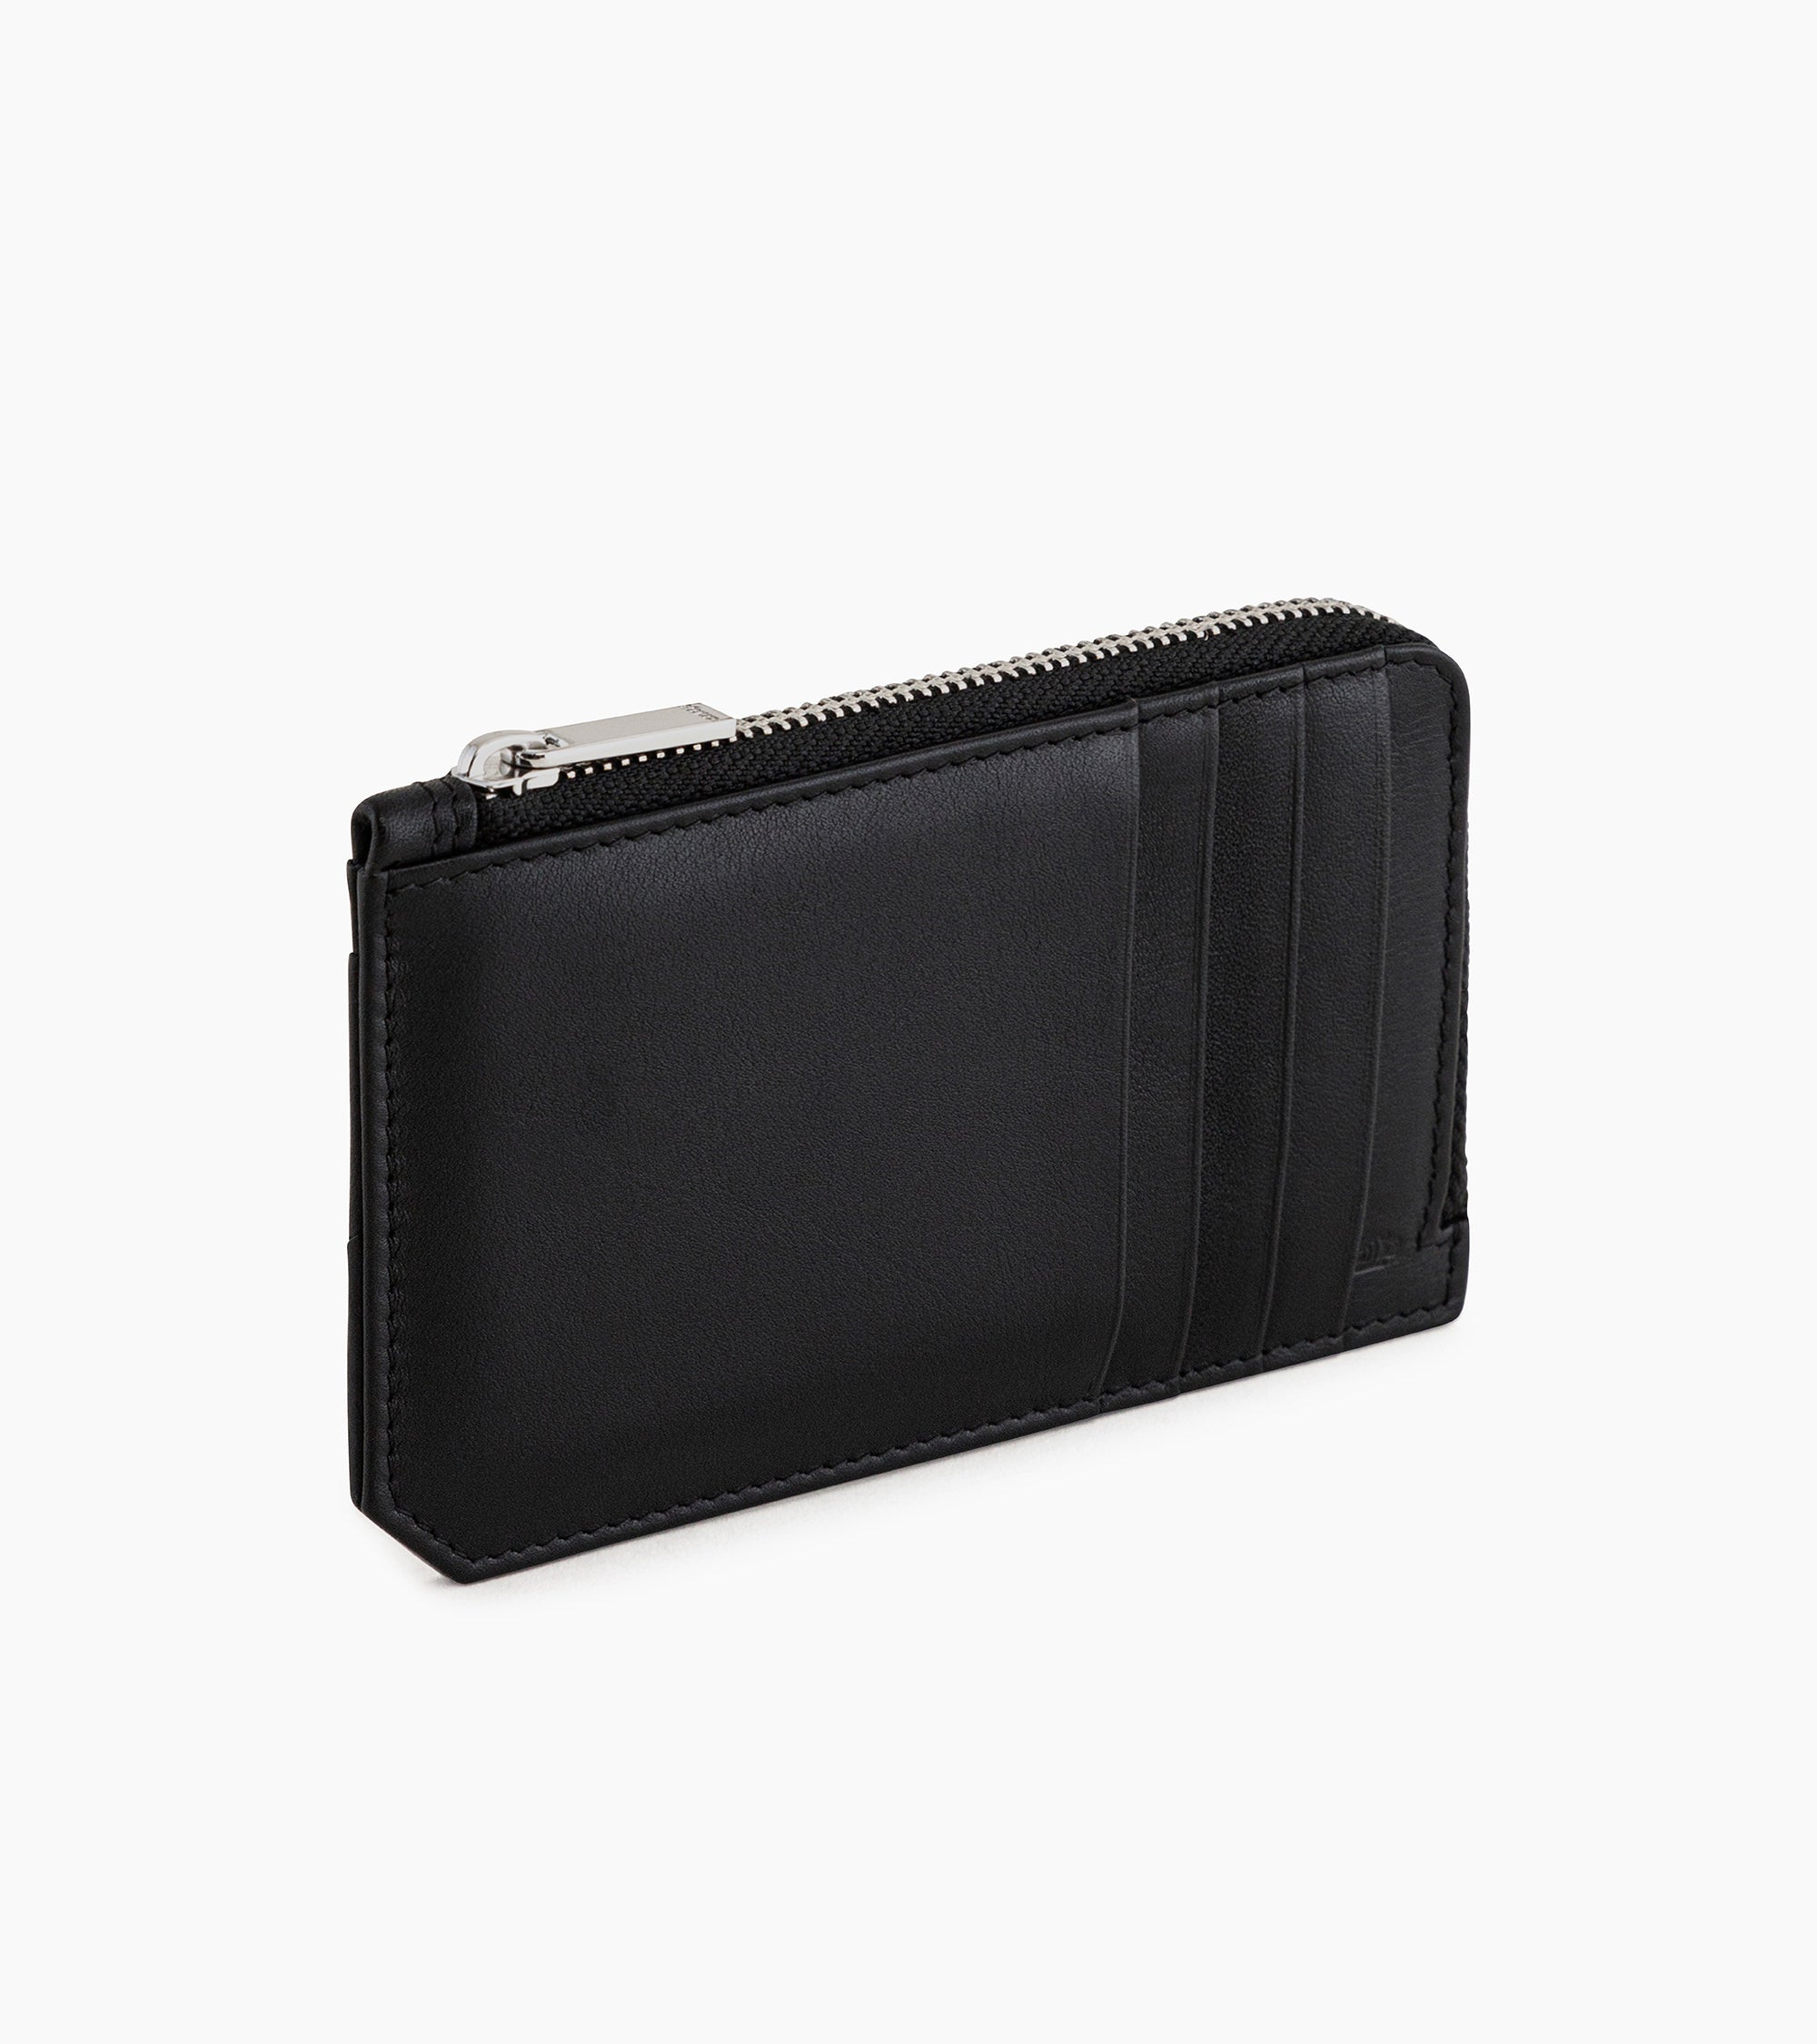 Georges smooth leather L-zip cardholder